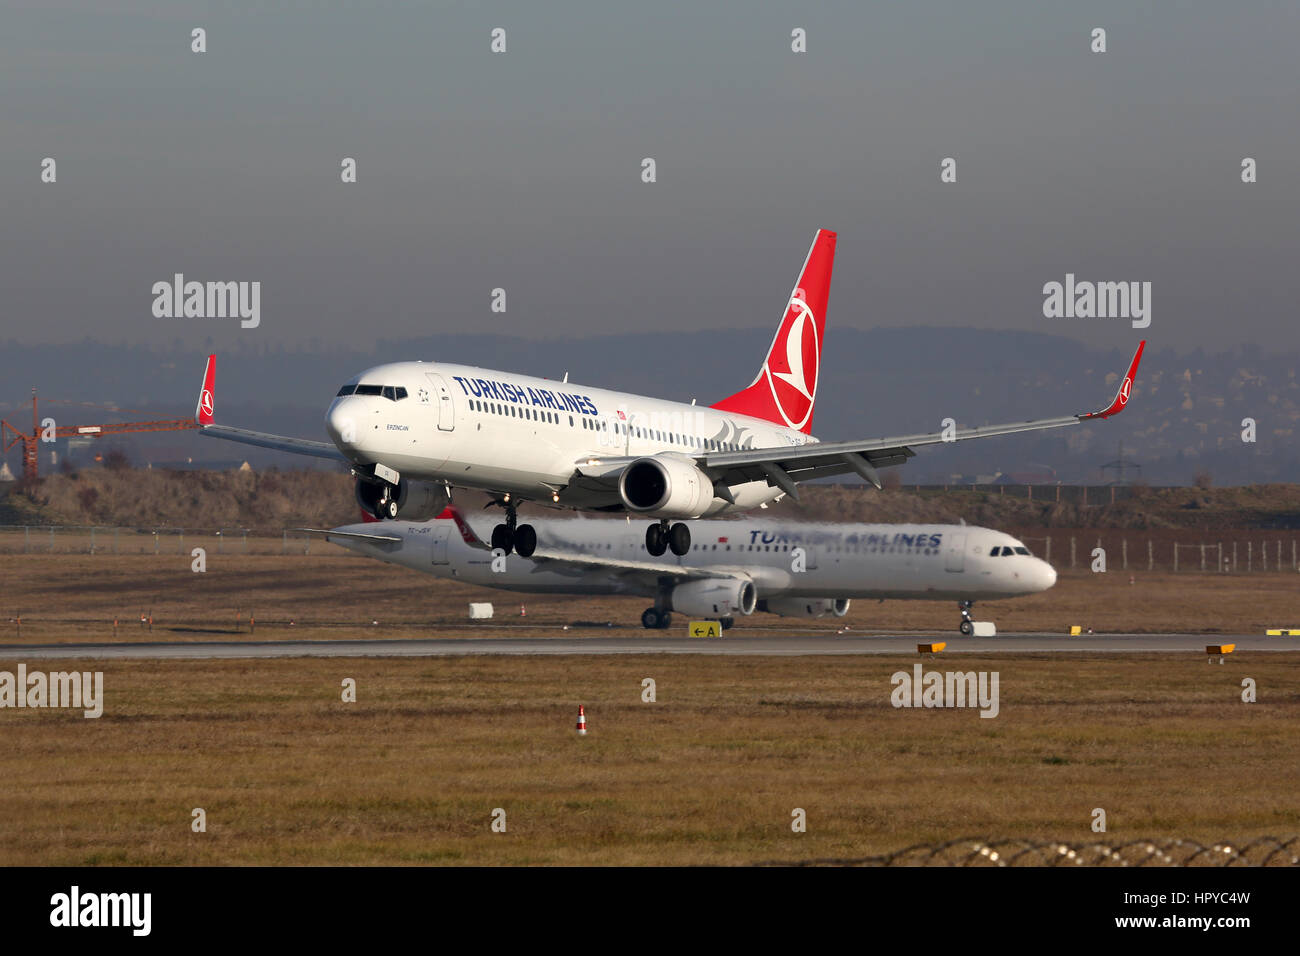 Stuttgart, Germany - December 22, 2016: A Turkish Airlines Boeing 737-800 airplane with the registration TC-JGG at Stuttgart Airport (STR) in Germany. Stock Photo